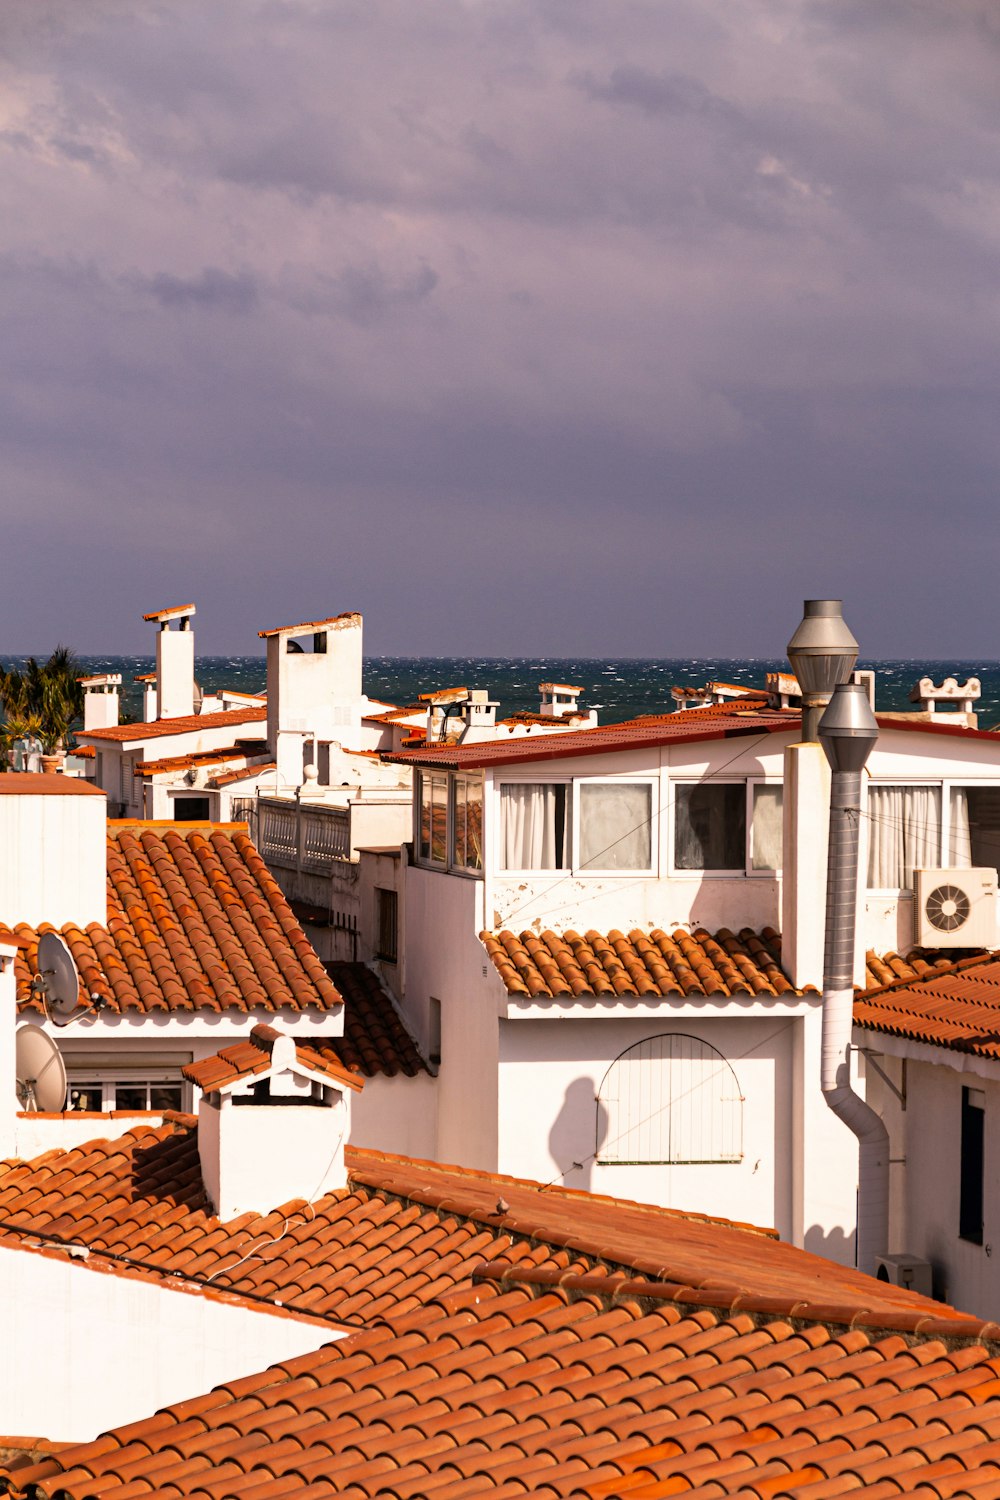 a row of white buildings with red tiled roofs